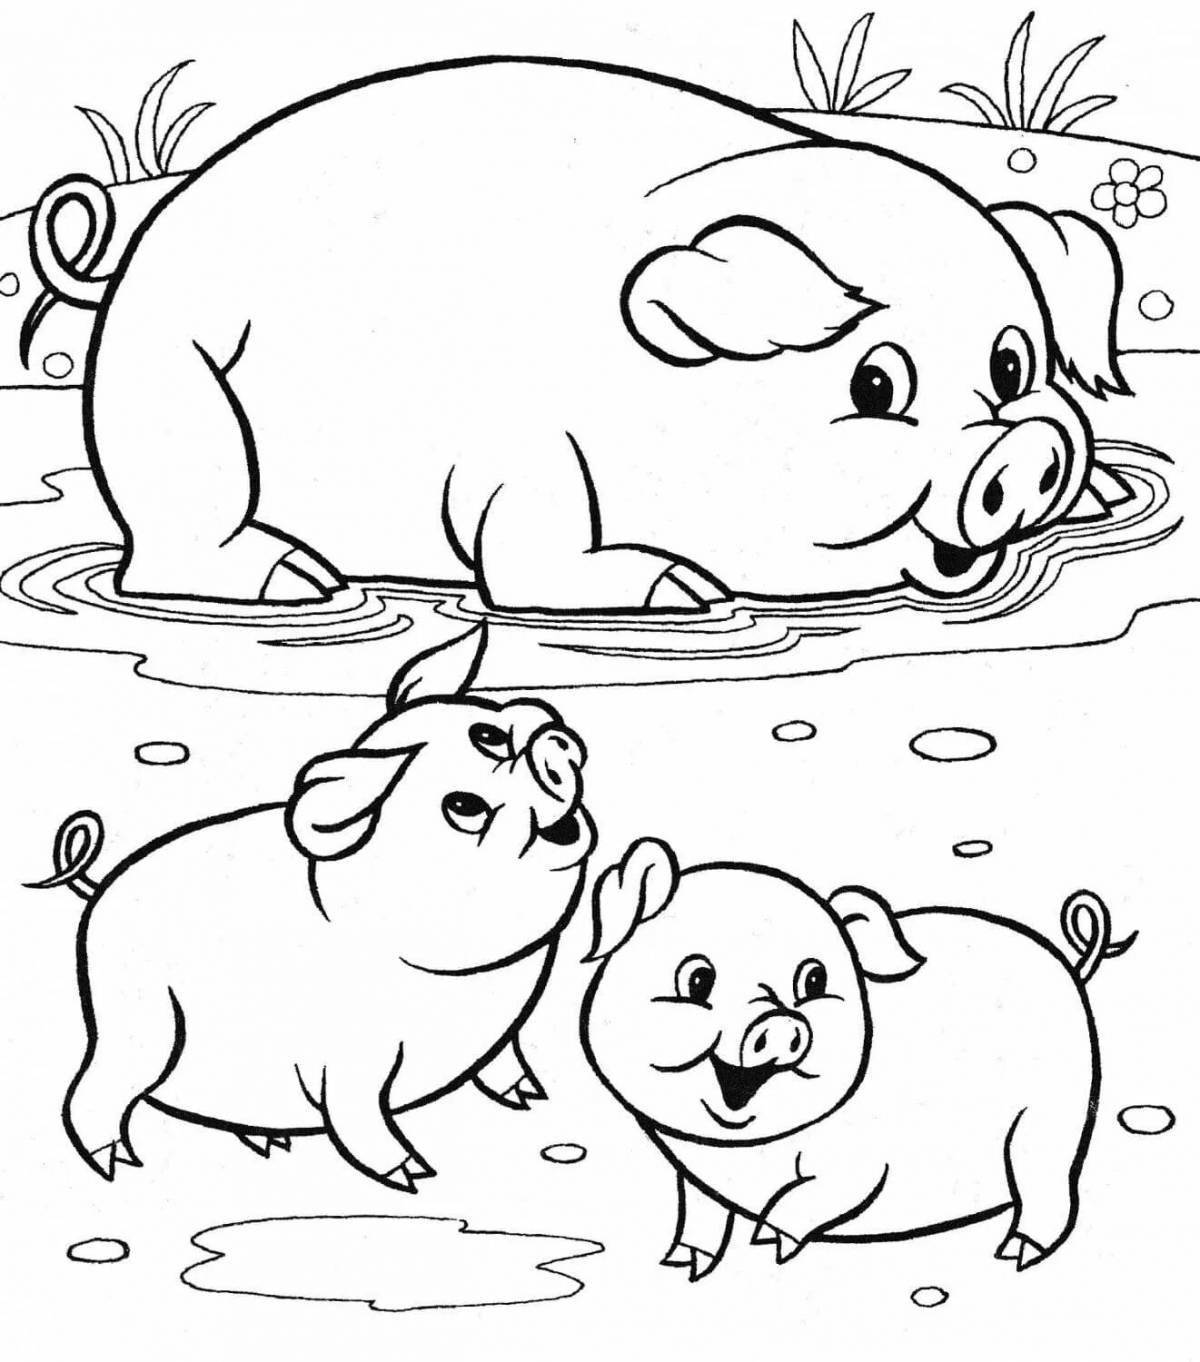 Fluffy coloring pages pets for kids 5-7 years old